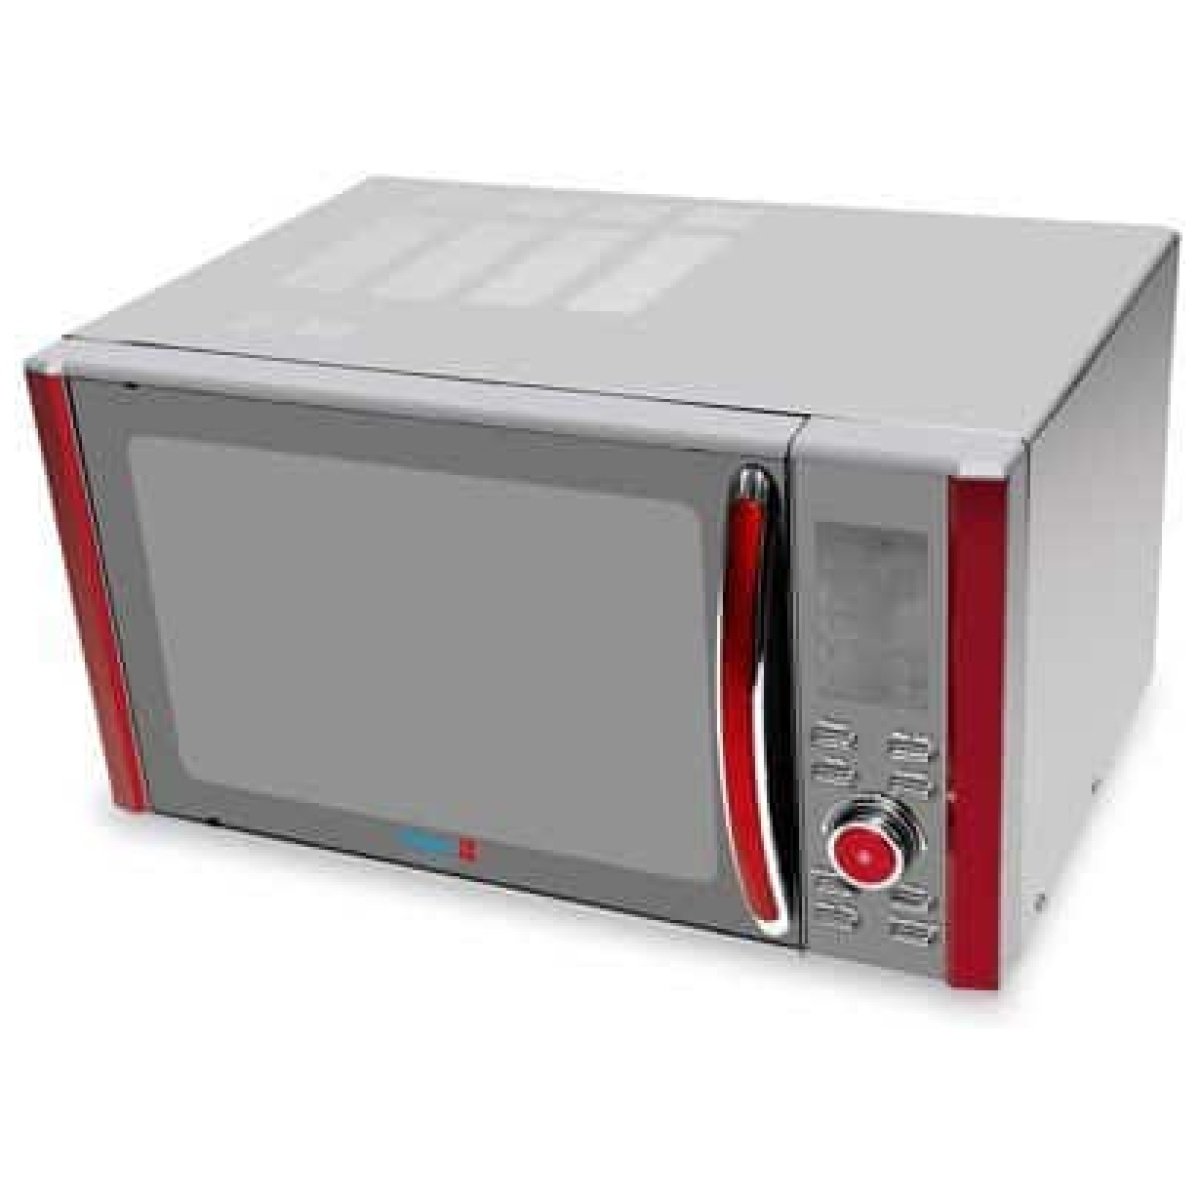 Scanfrost SF23-BW-SDG - 23 LITERS Microwave WITH GRILL